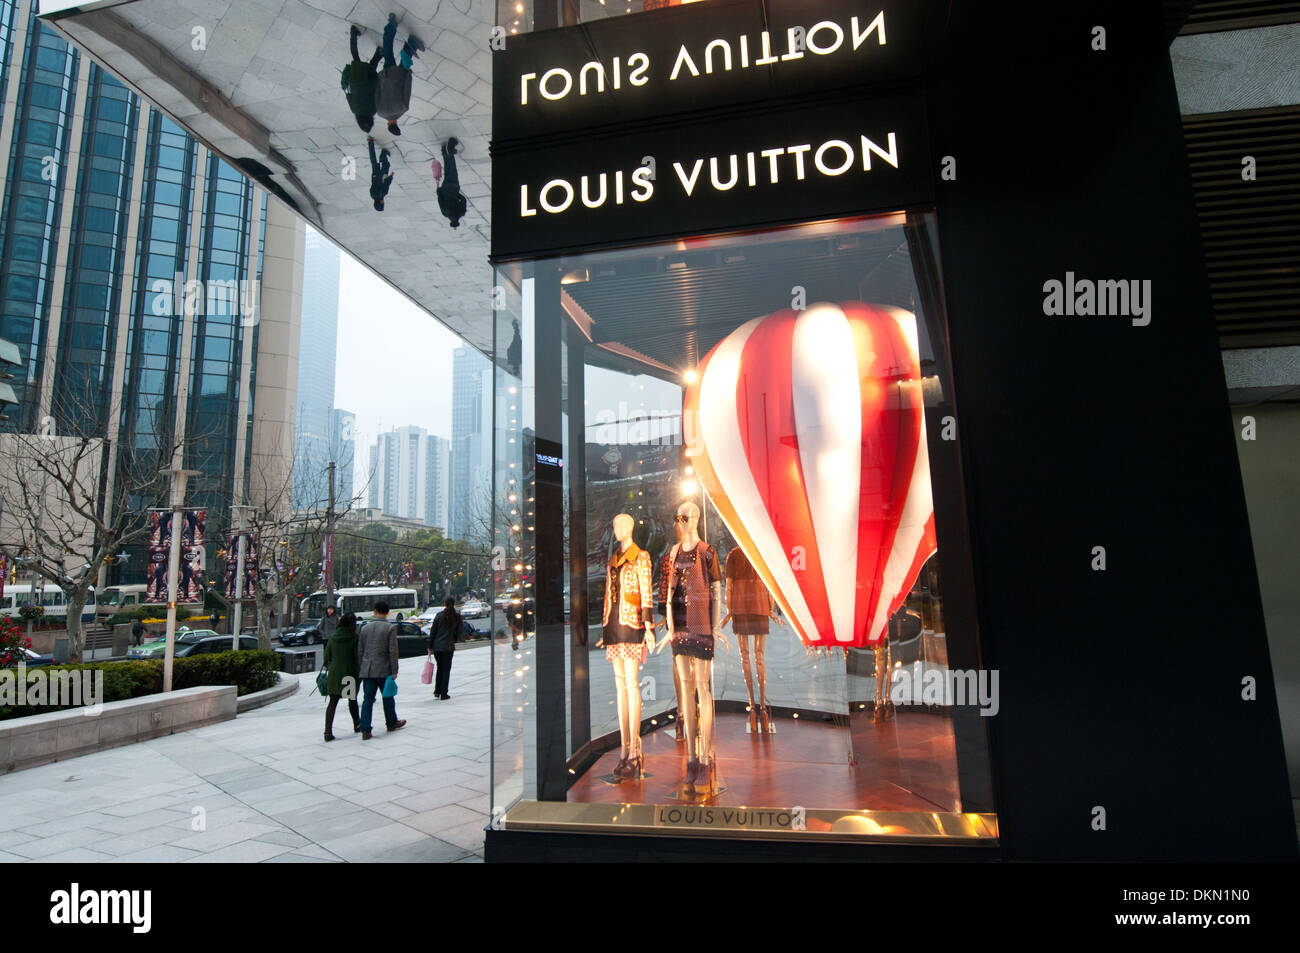 Louis Vuitton shop in Plaza 66 commercial and office complex at West Stock Photo: 63771932 - Alamy